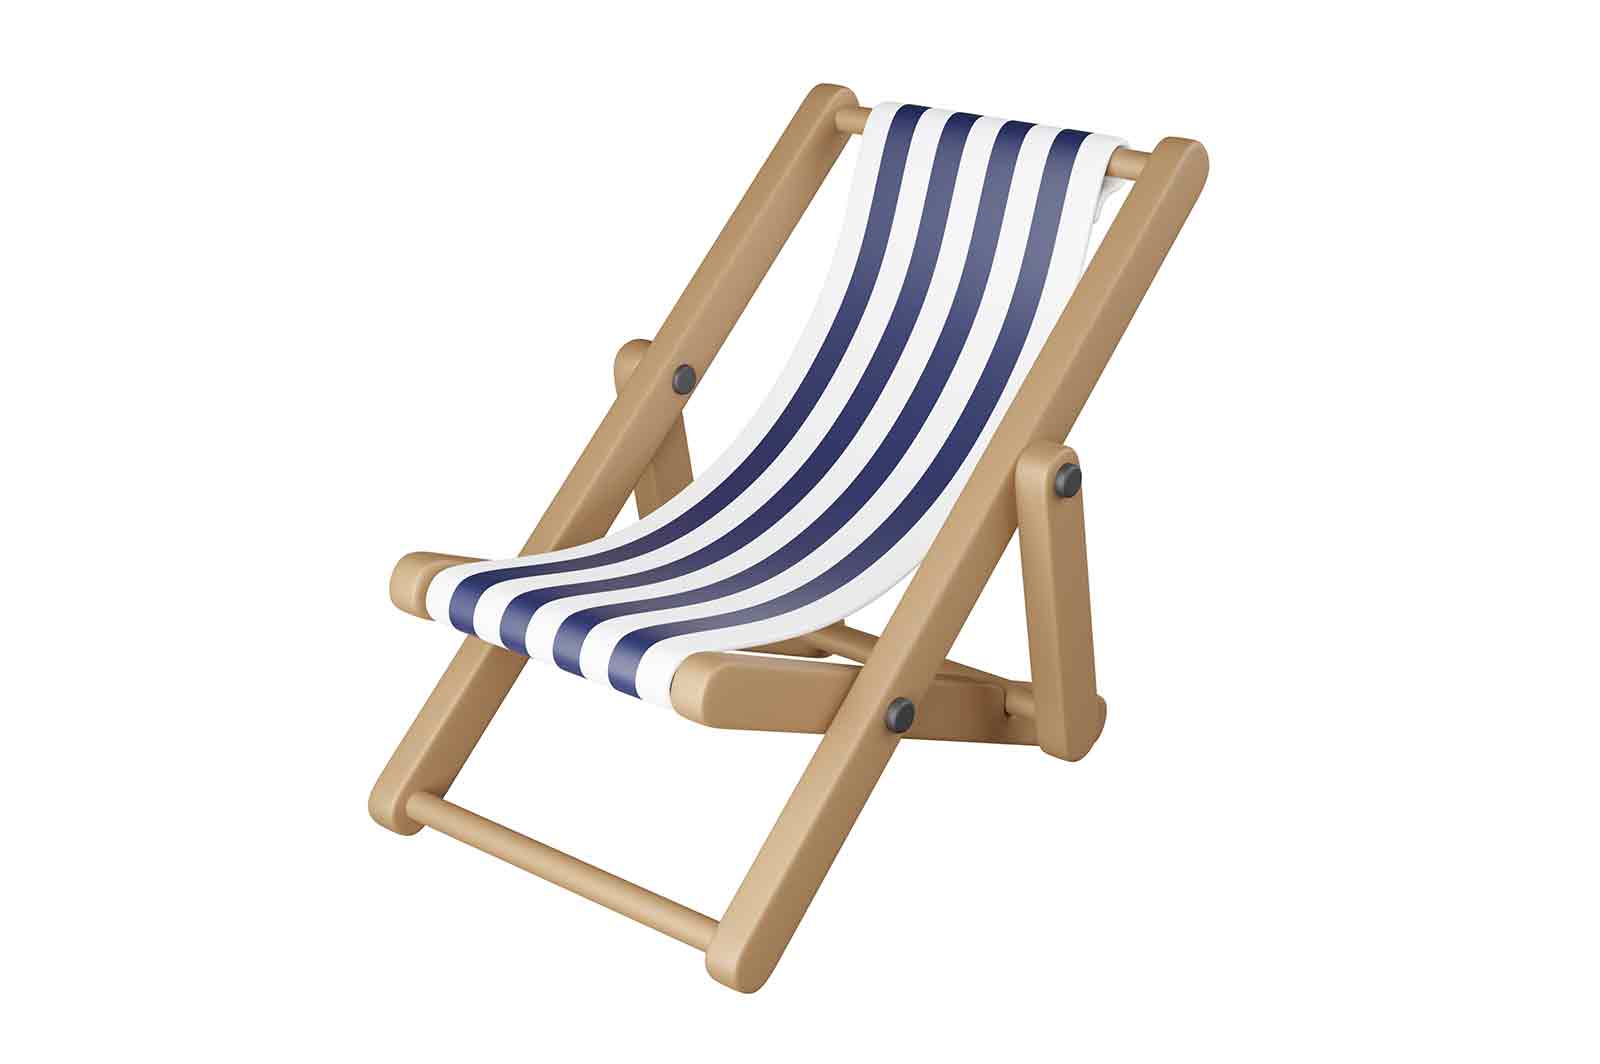 Deckchair 3d rendered icon illustration. Beach chair or chaise-longue for relaxing on beach. Summer time concept